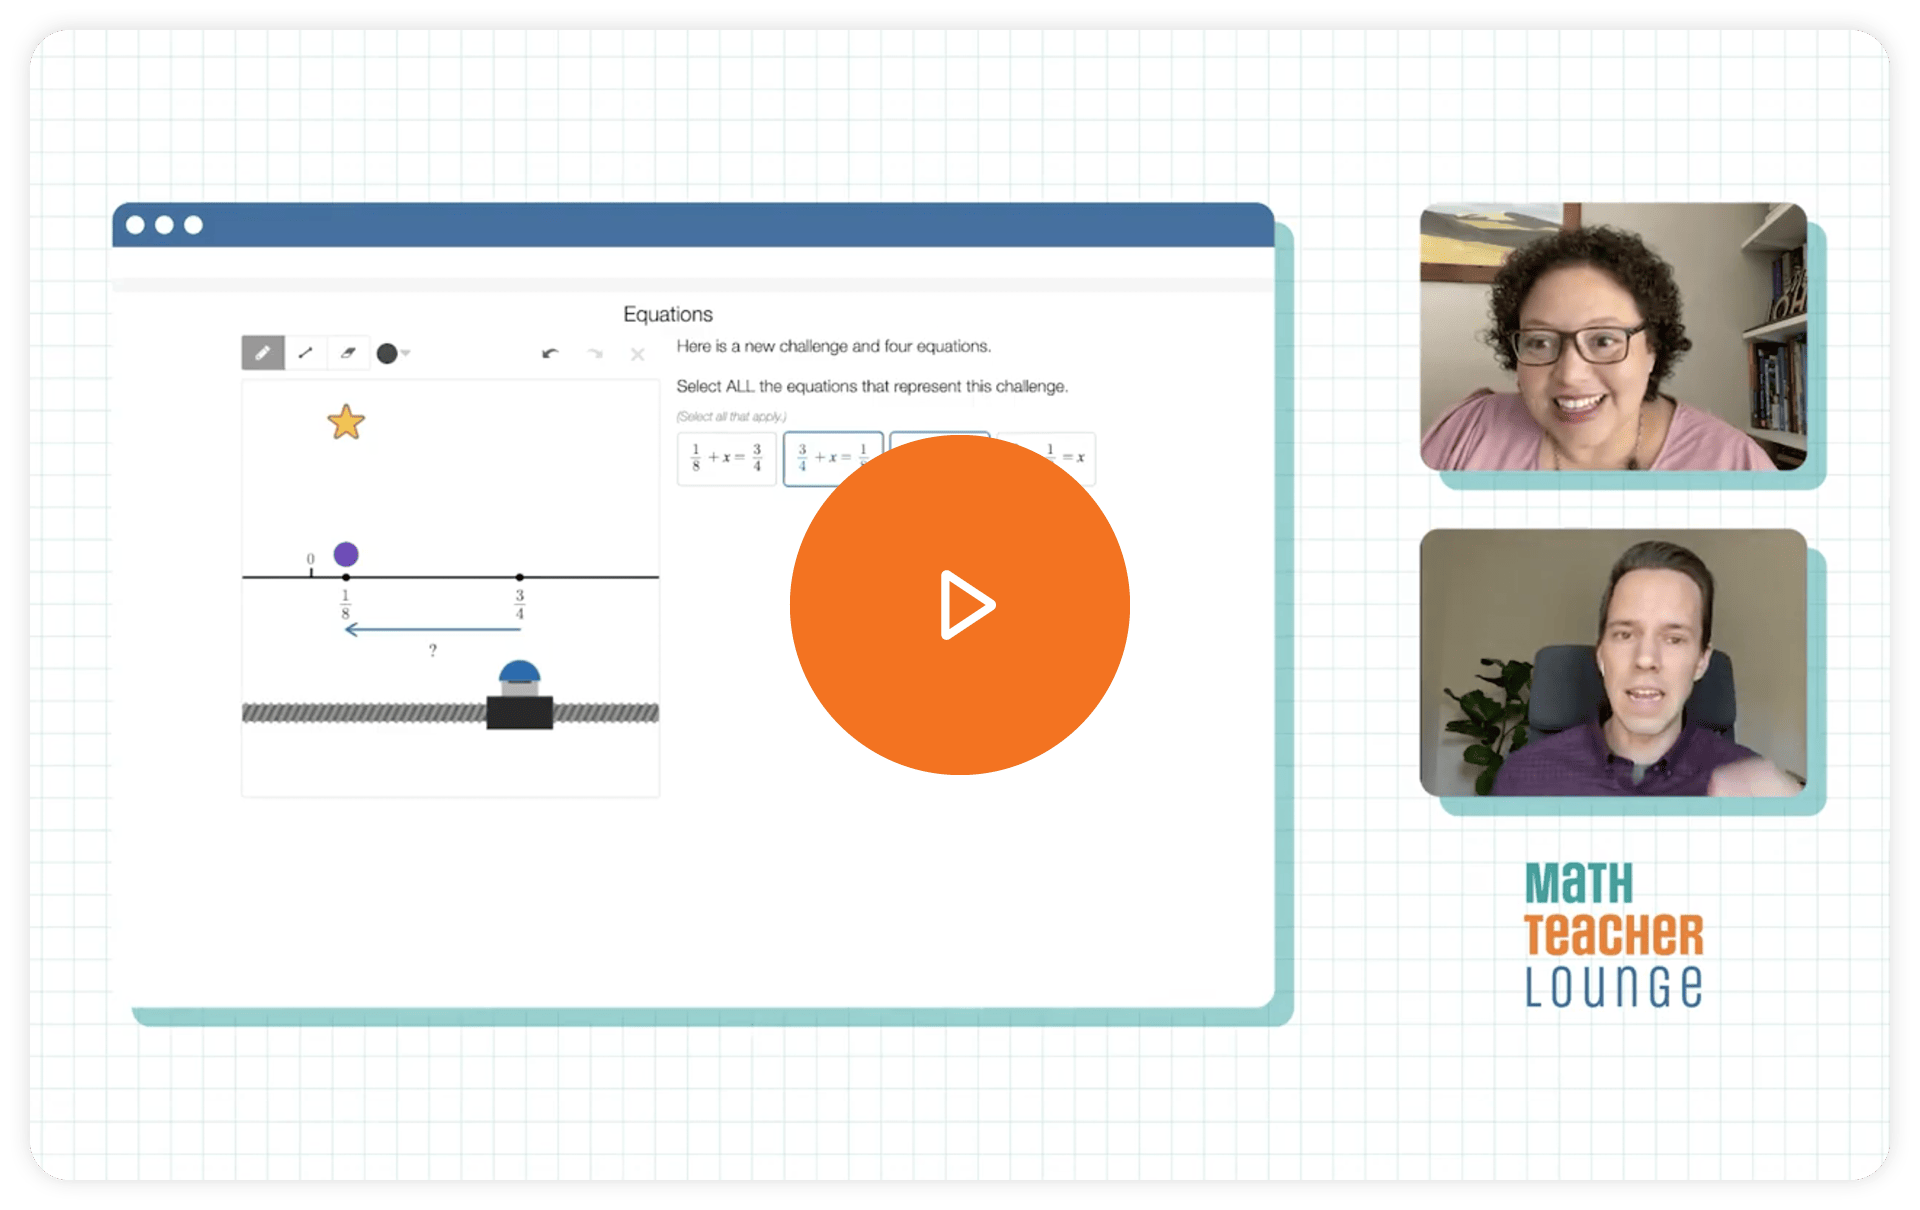 Screenshot of an online math podcast session showing a math equations slide, with two engaged math educators visible in separate video call windows.